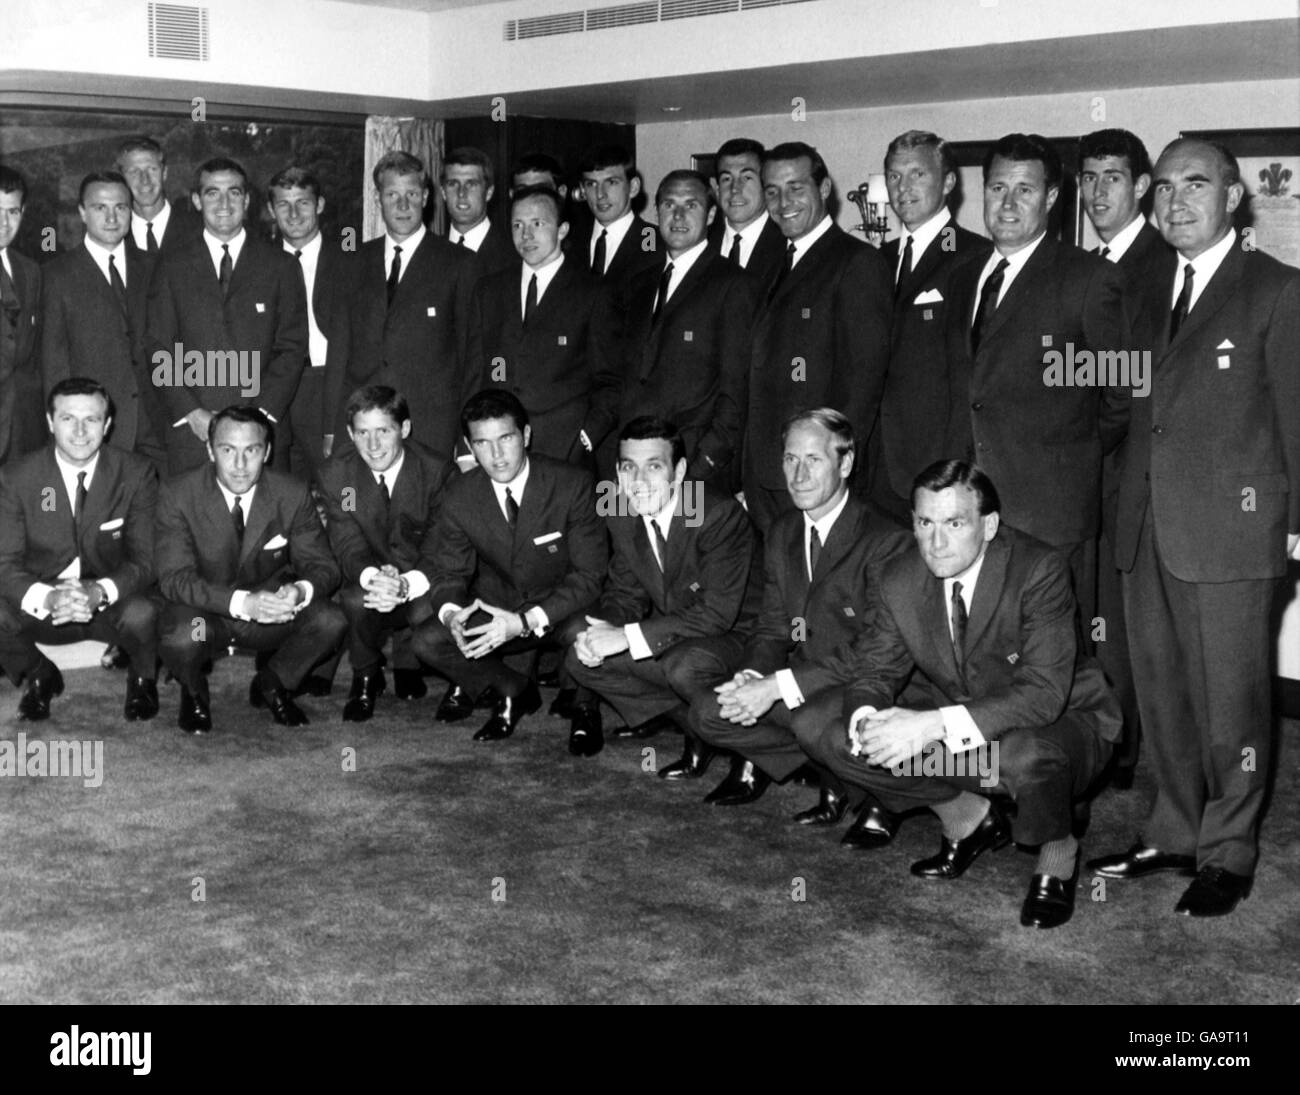 The England squad for the 1966 World Cup Finals: (back row, l-r) John Connelly, George Cohen, Jack Charlton, Gerry Byrne, Roger Hunt, Ron Flowers, Geoff Hurst, Nobby Stiles, Norman Hunter (hidden), Martin Peters, Ray Wilson, Gordon Banks, Ron Springett, Bobby Moore, Trainer Harold Shepherdson, Peter Bonetti, Manager Alf Ramsay (front row, l-r) Jimmy Armfield, Jimmy Greaves, Alan Ball, Terry Paine, Ian Callaghan, Bobby Charlton, George Eastham Stock Photo